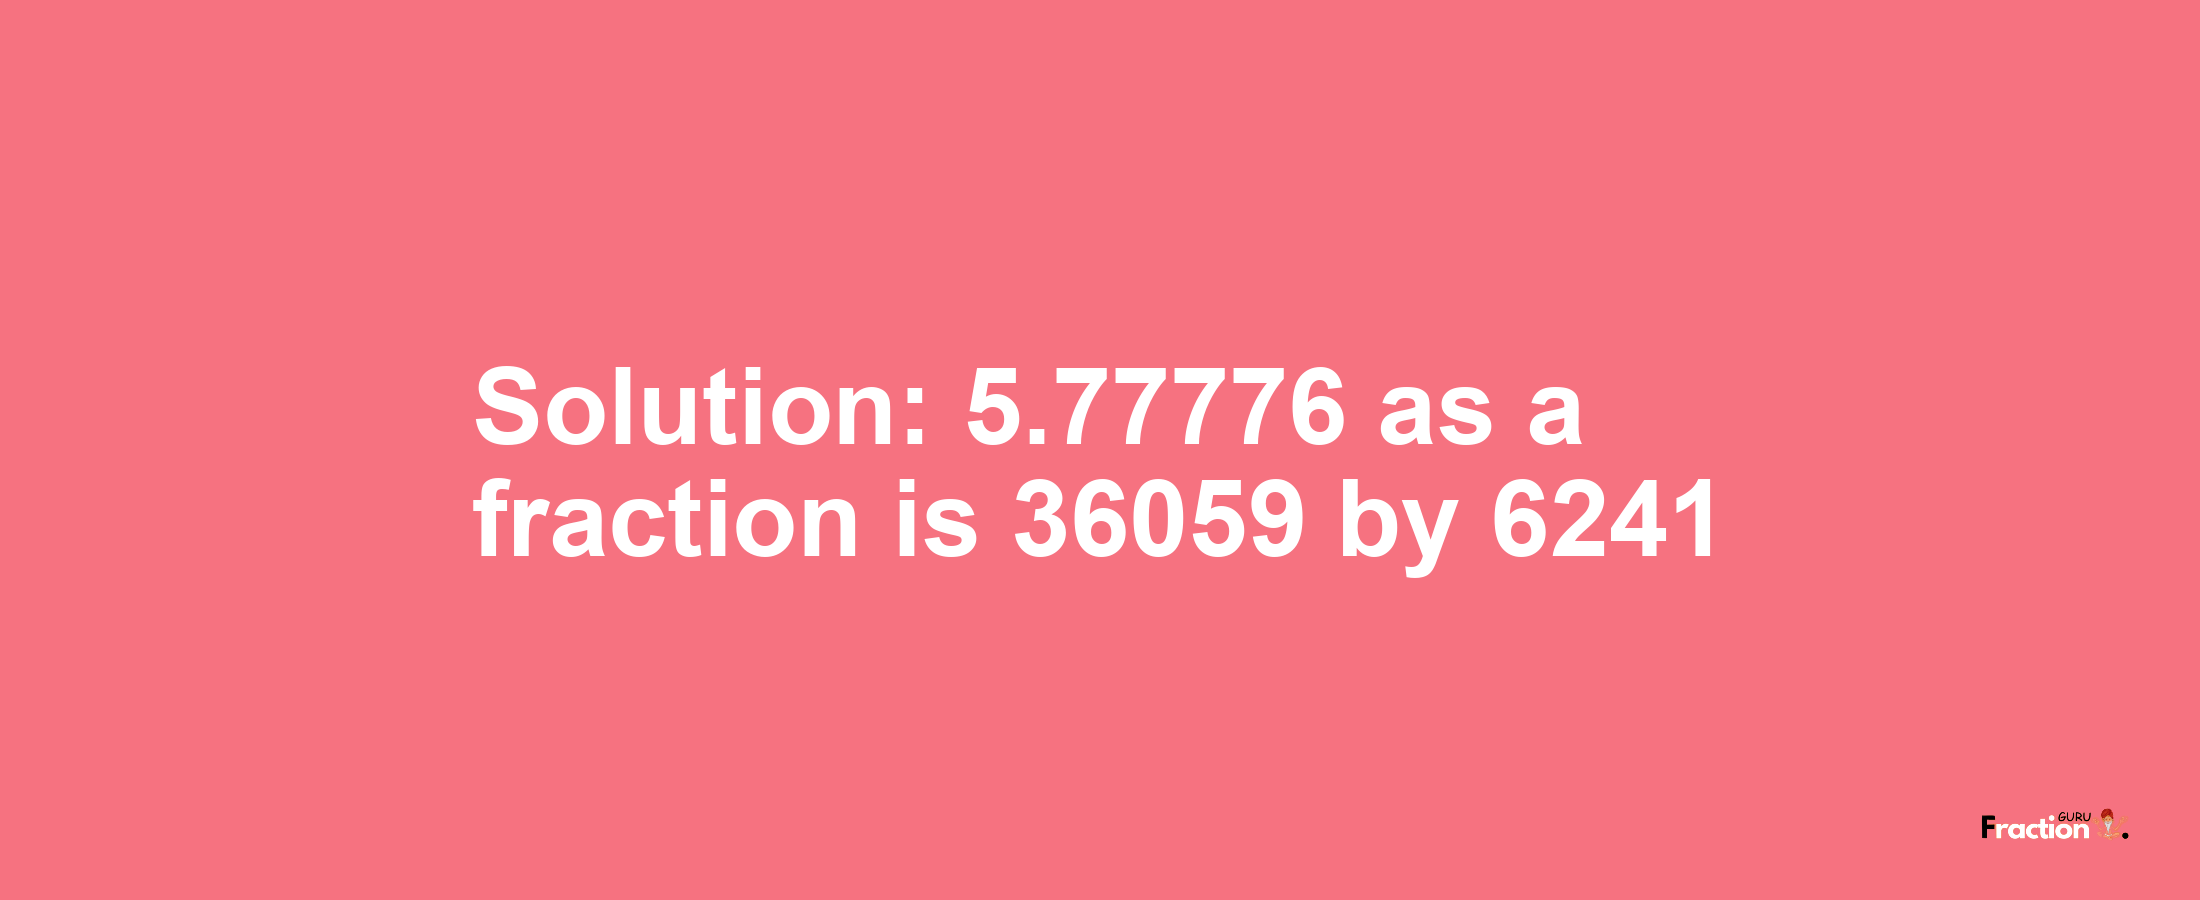 Solution:5.77776 as a fraction is 36059/6241